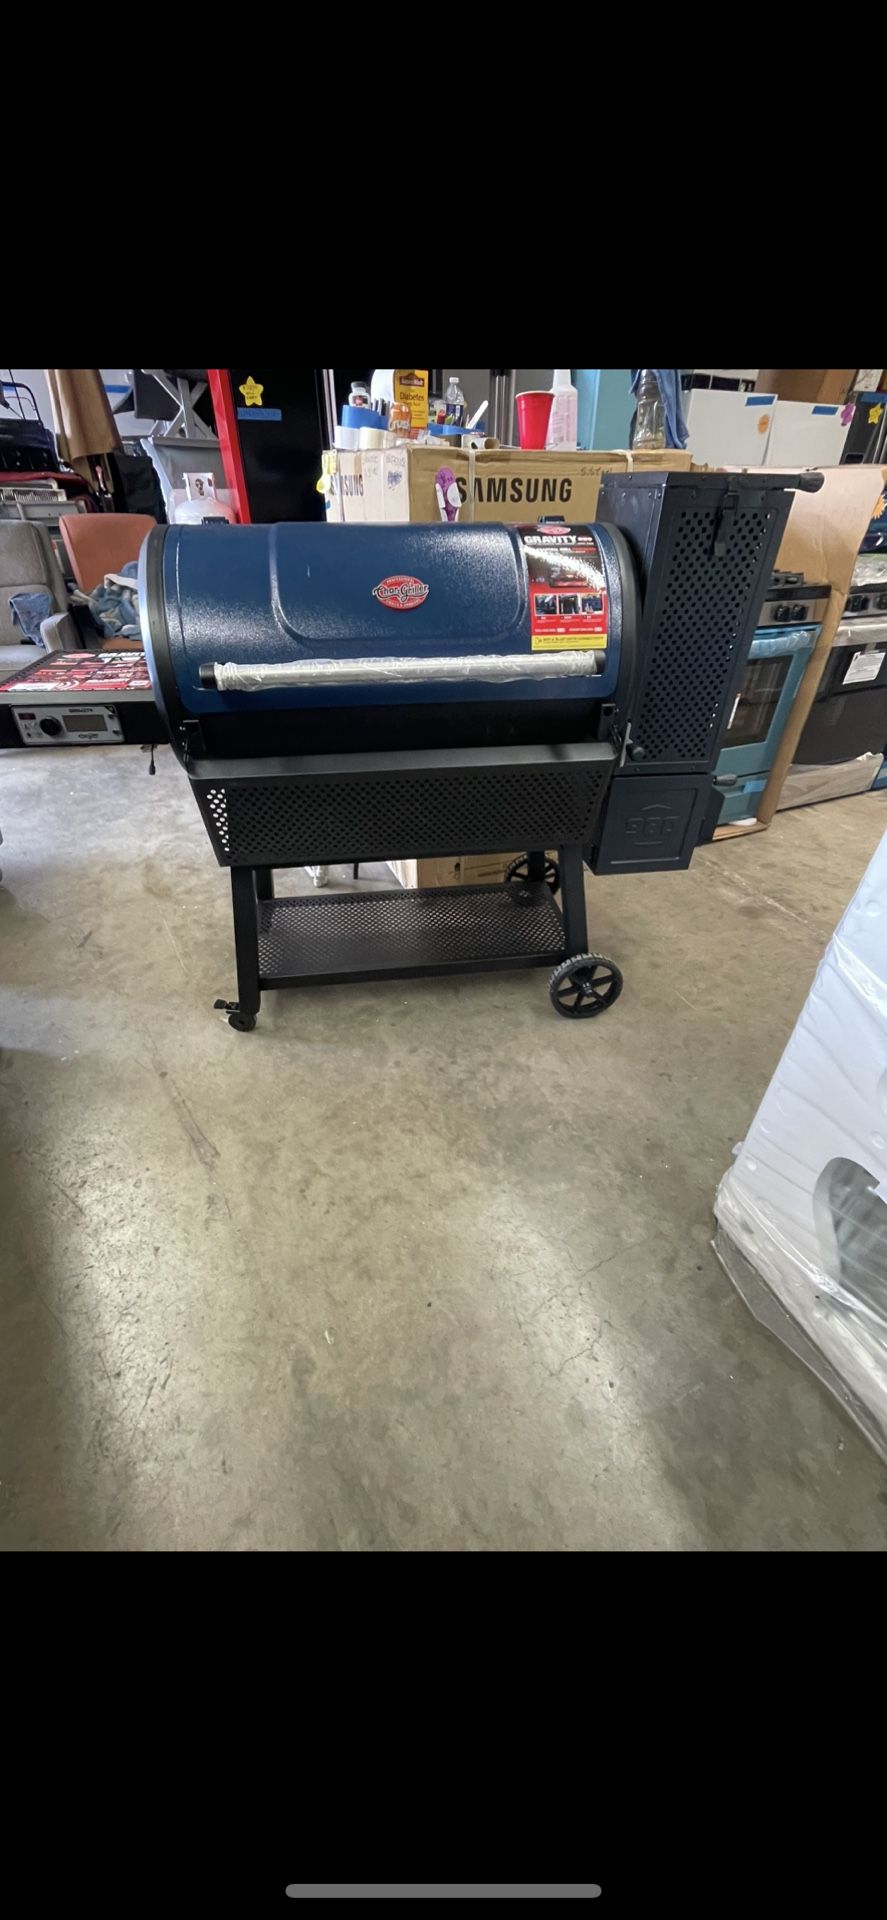 Bbq Grill Charcoal X Cover 